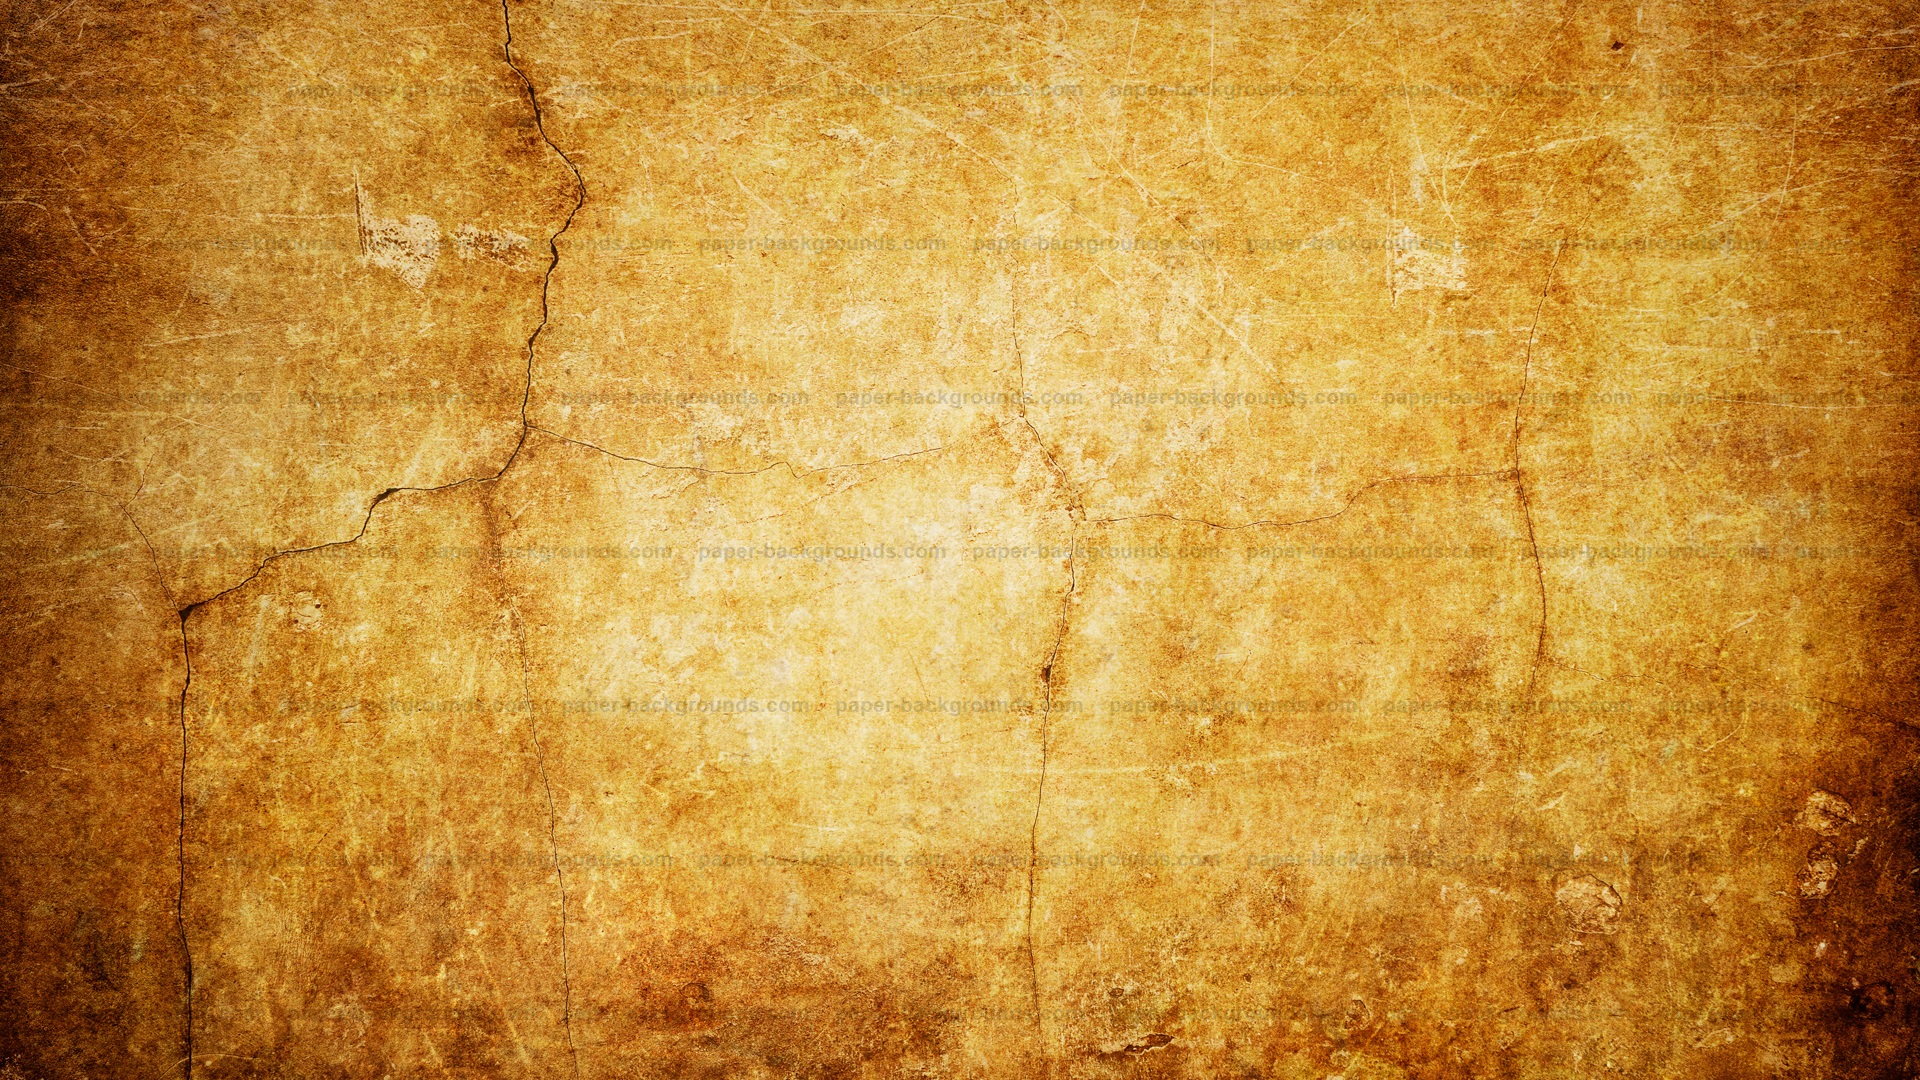 Paper Backgrounds high resolution texture Royalty Free